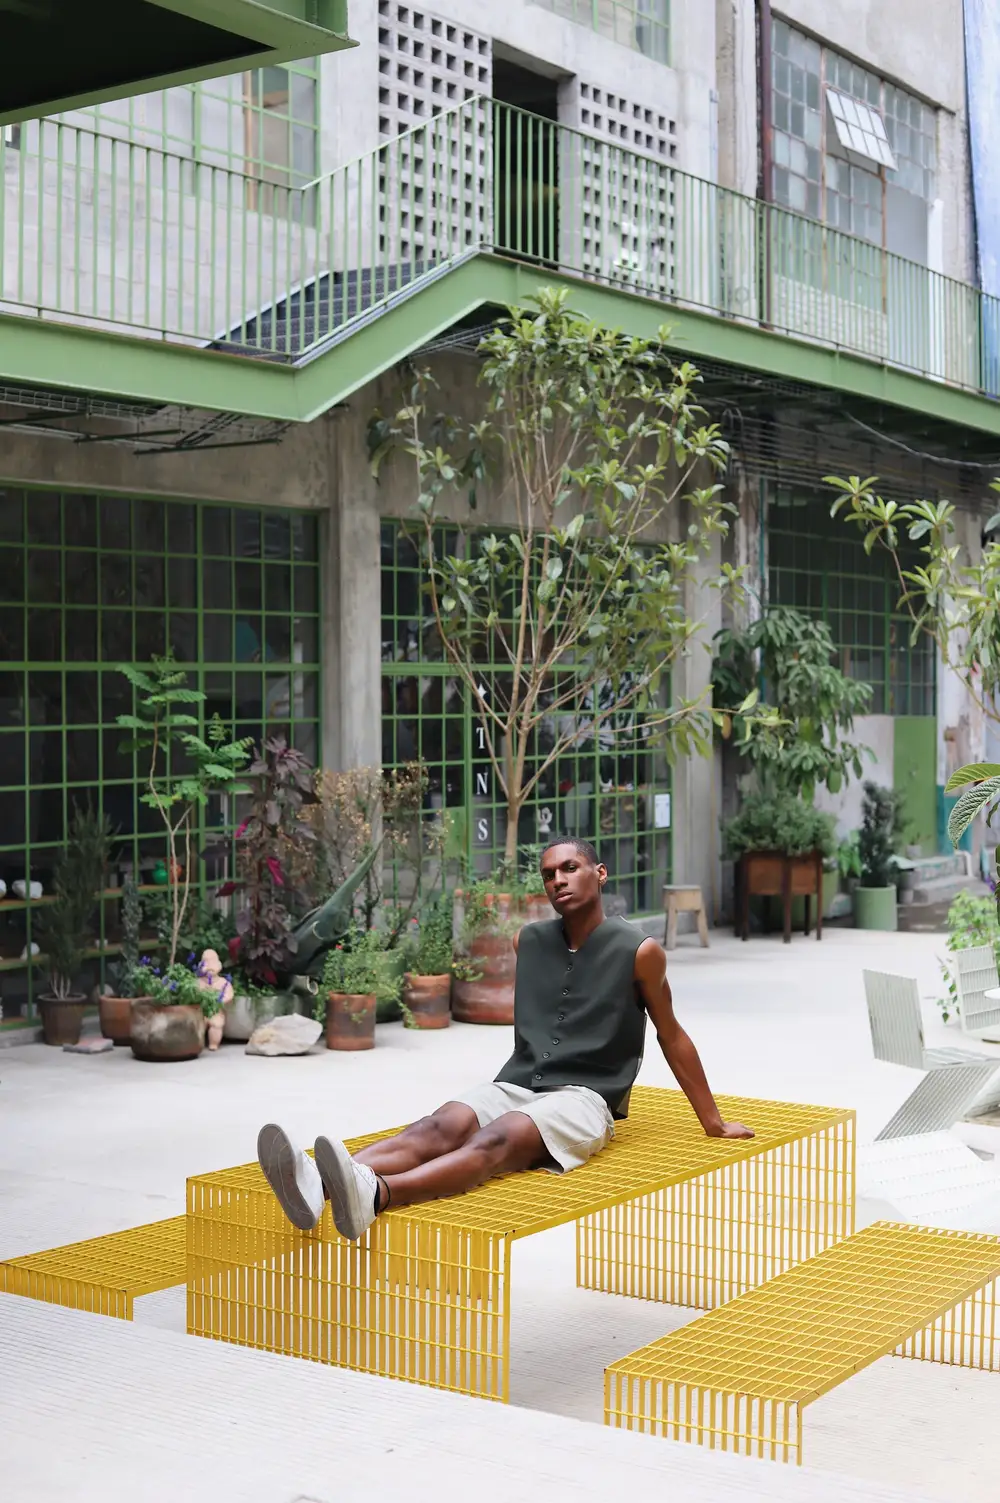 Man resting on yellow grille